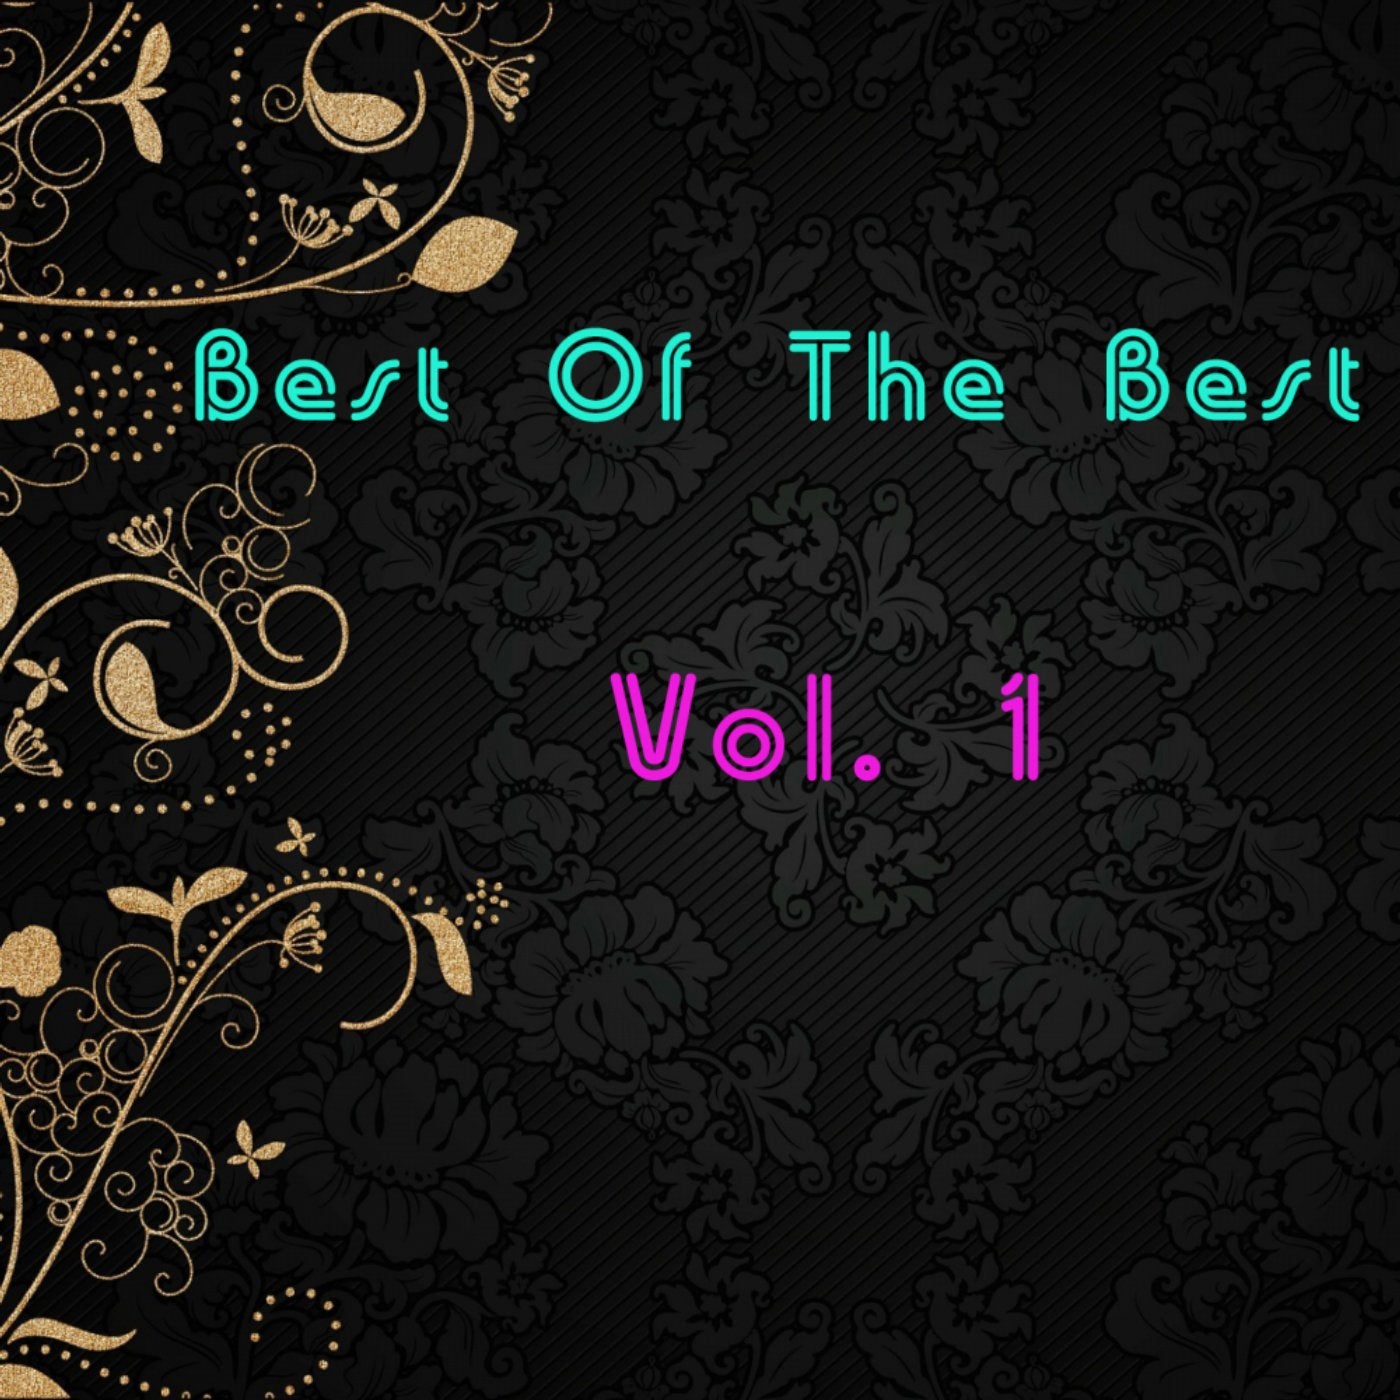 Best Of The Best, Vol. 1